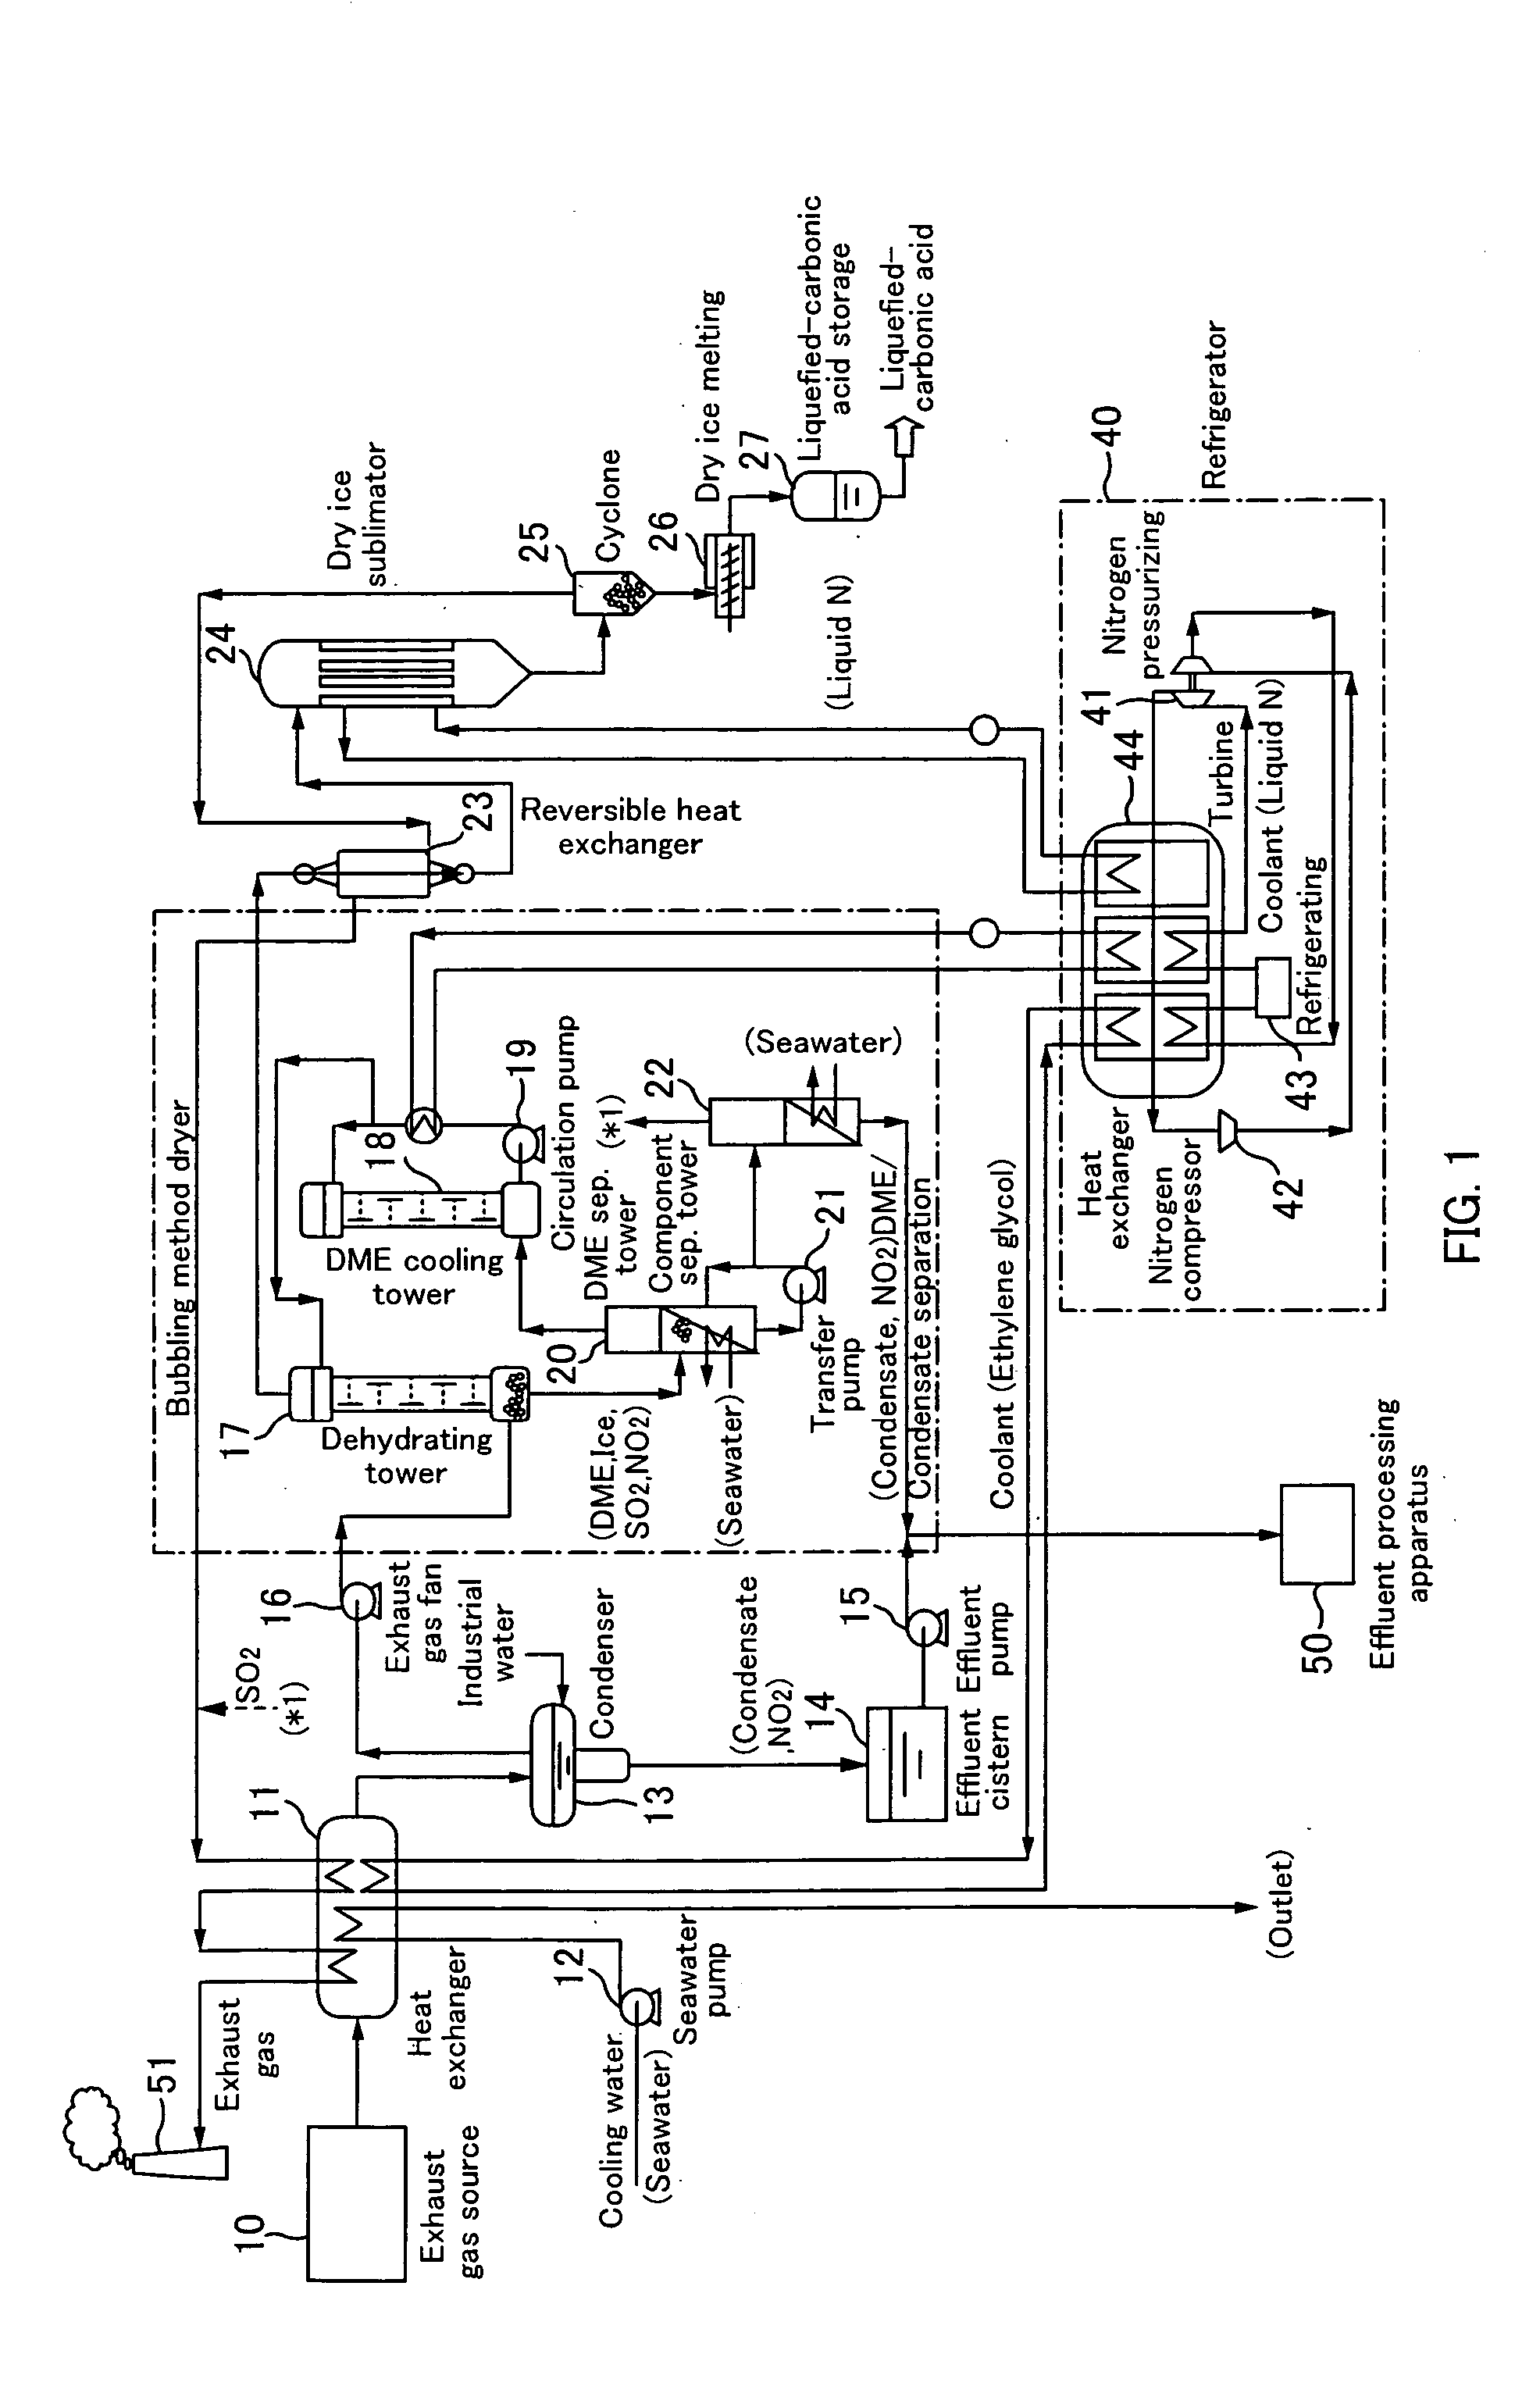 Method And System Of Processing Exhaust Gas, And Method And Apparatus Of Separating Carbon Dioxide